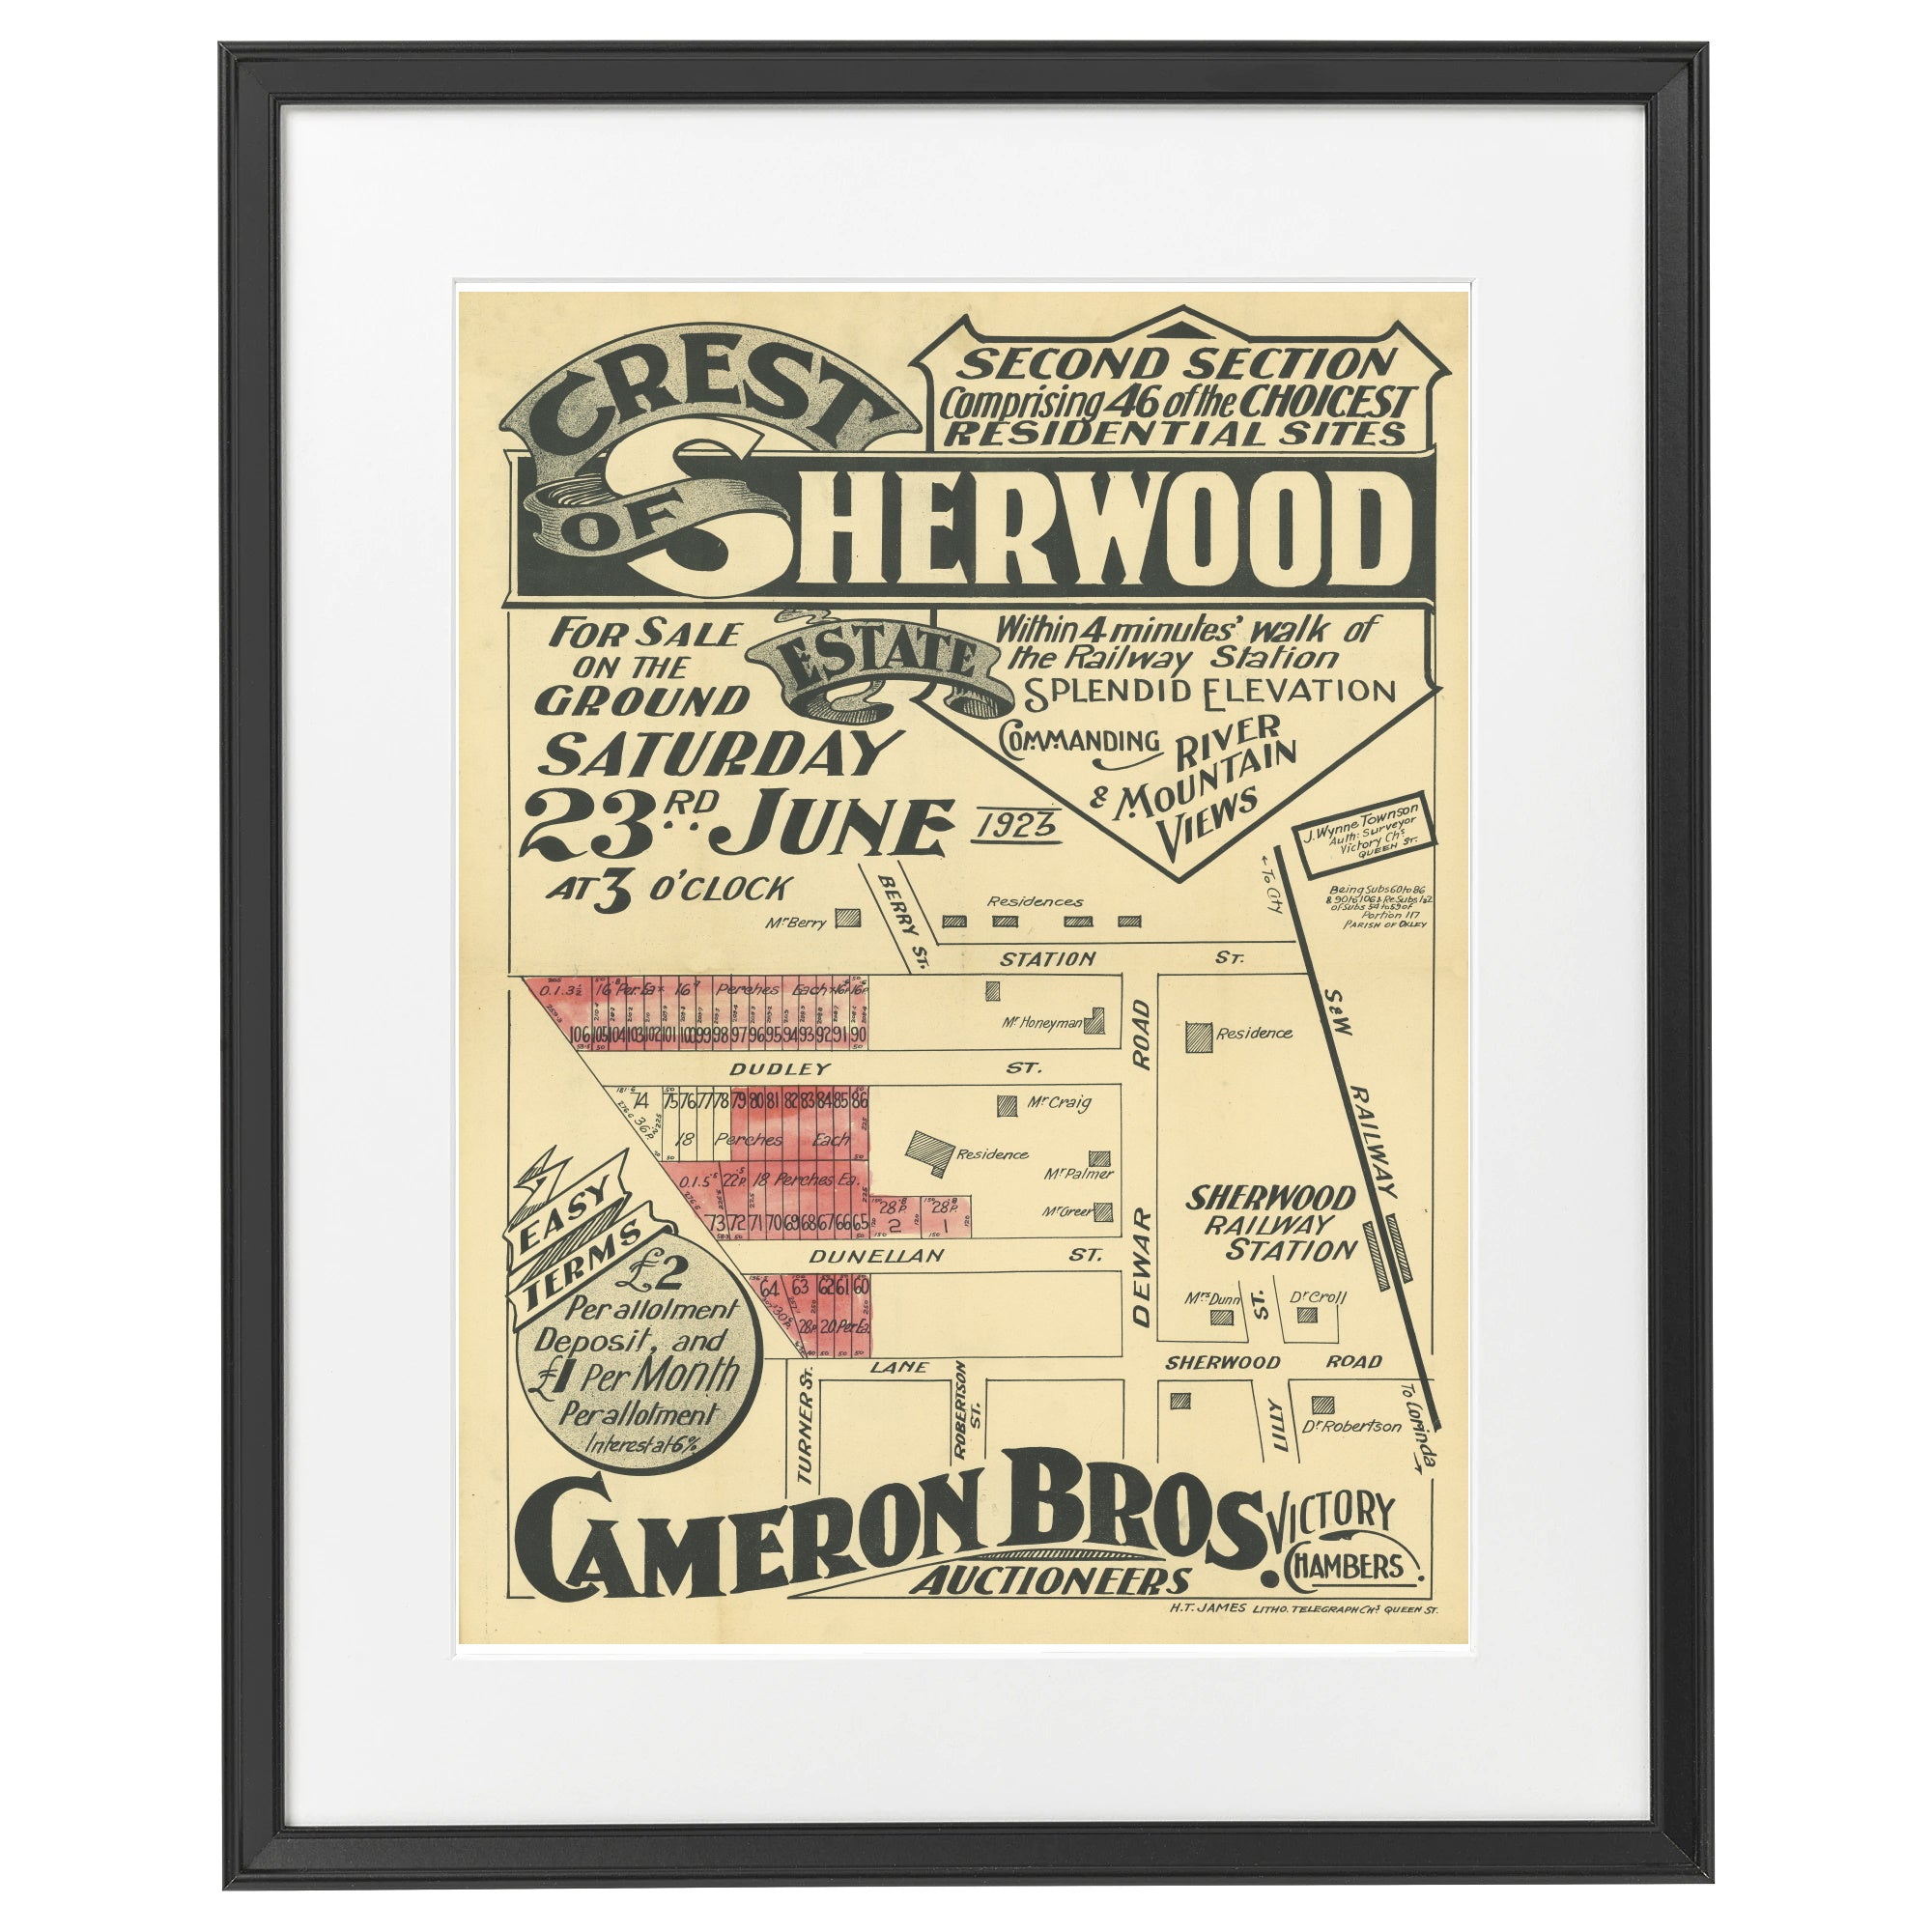 1923 Crest of Sherwood Estate - 100 years ago today